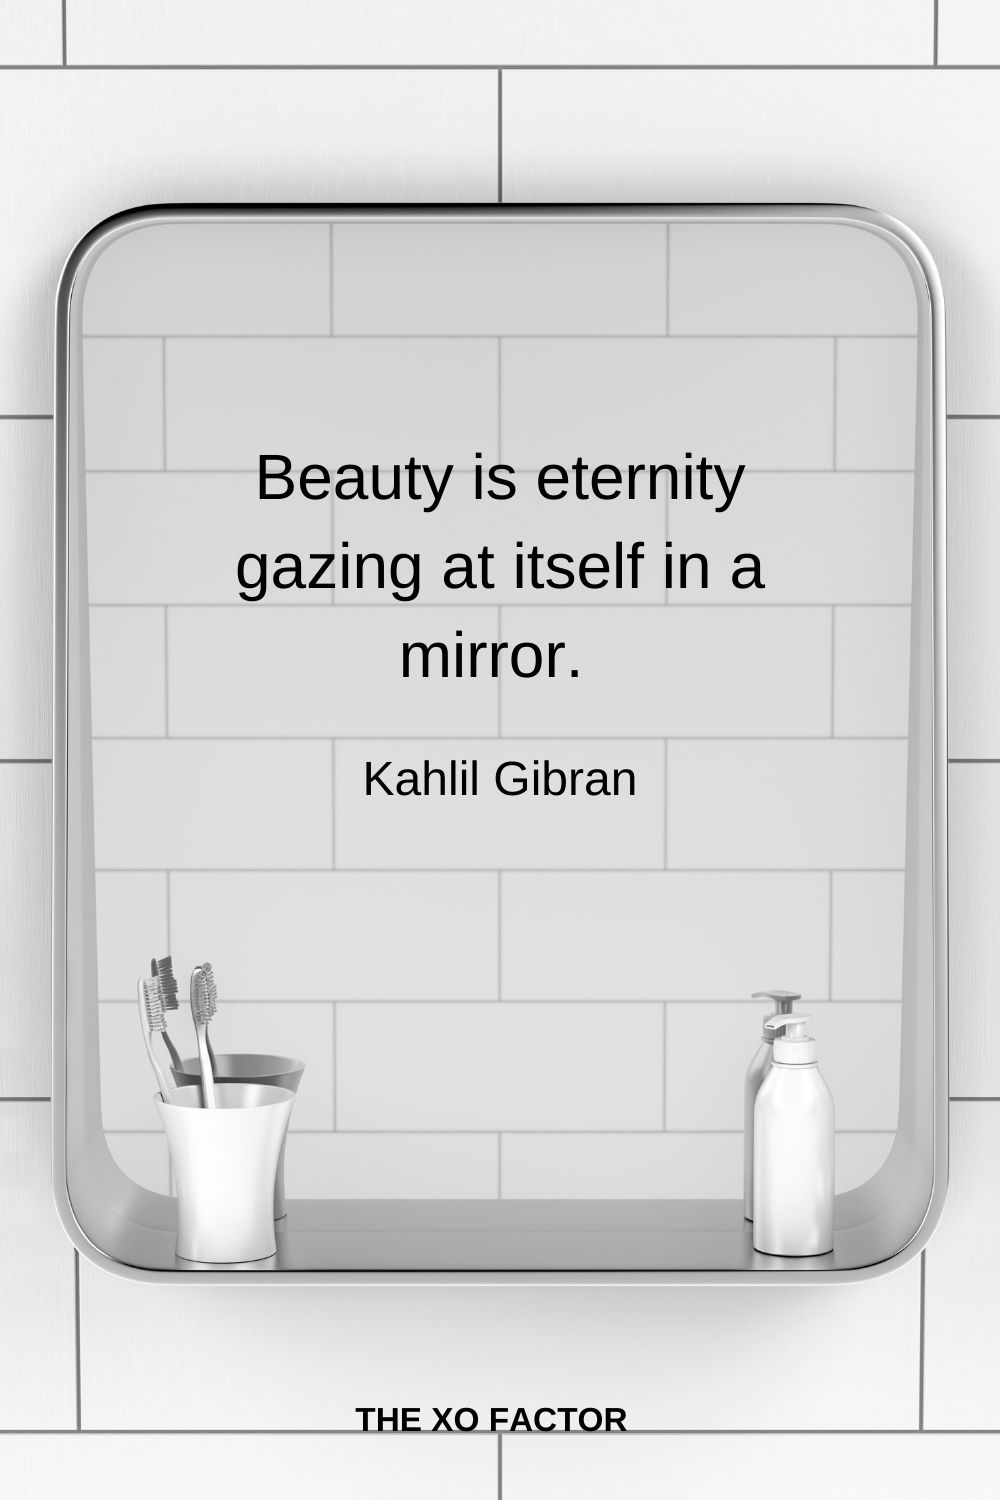 Beauty is eternity gazing at itself in a mirror.  Kahlil Gibran